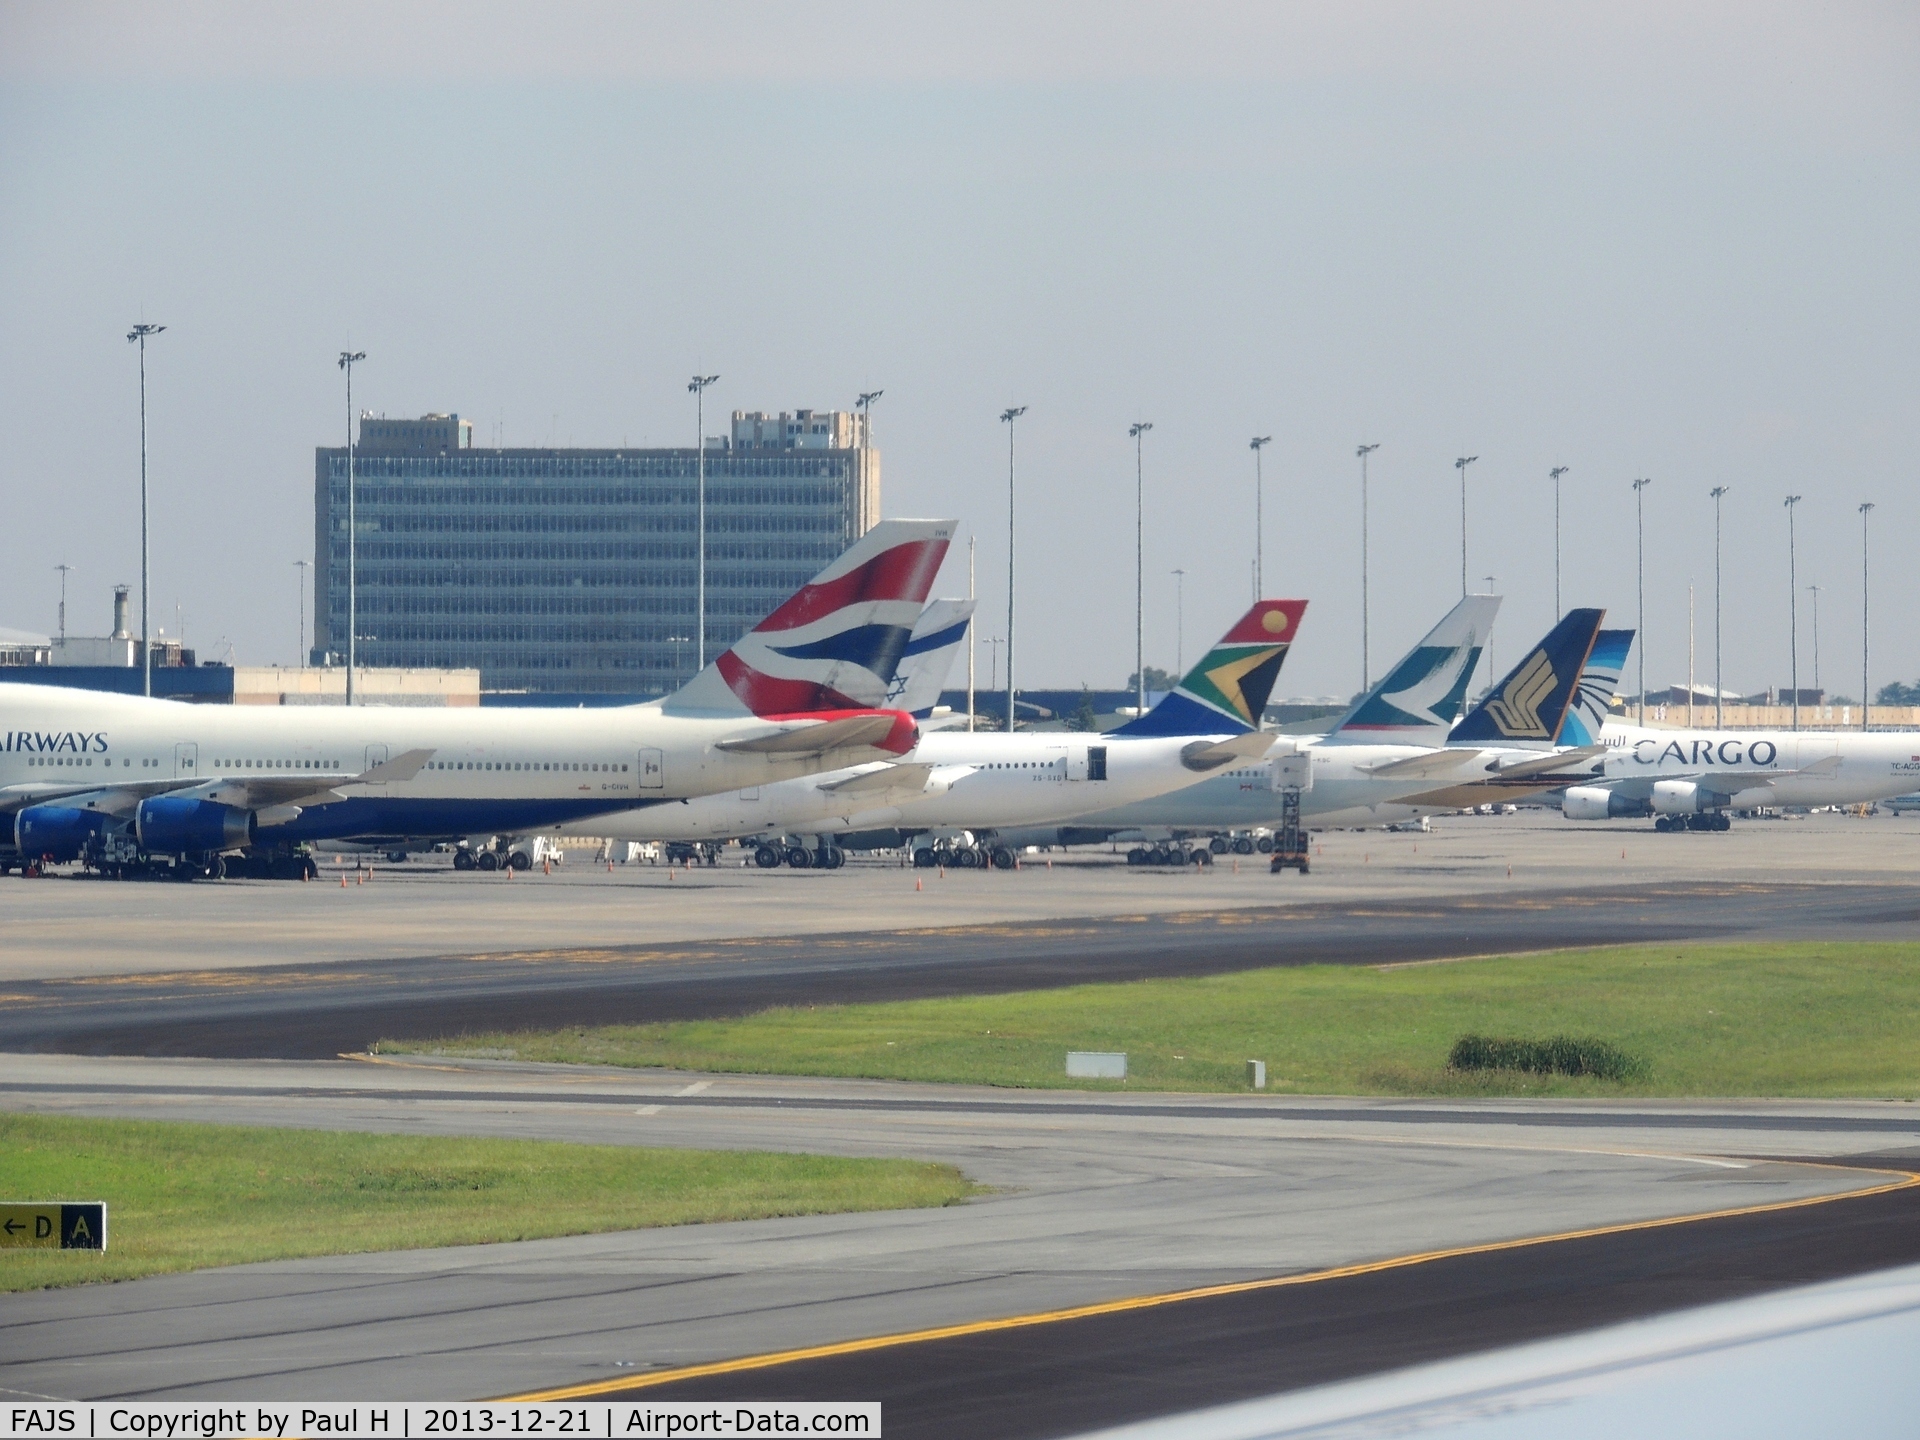 OR Tambo International Airport, Johannesburg South Africa (FAJS) - Cargo and passenger aircrafts at JNB